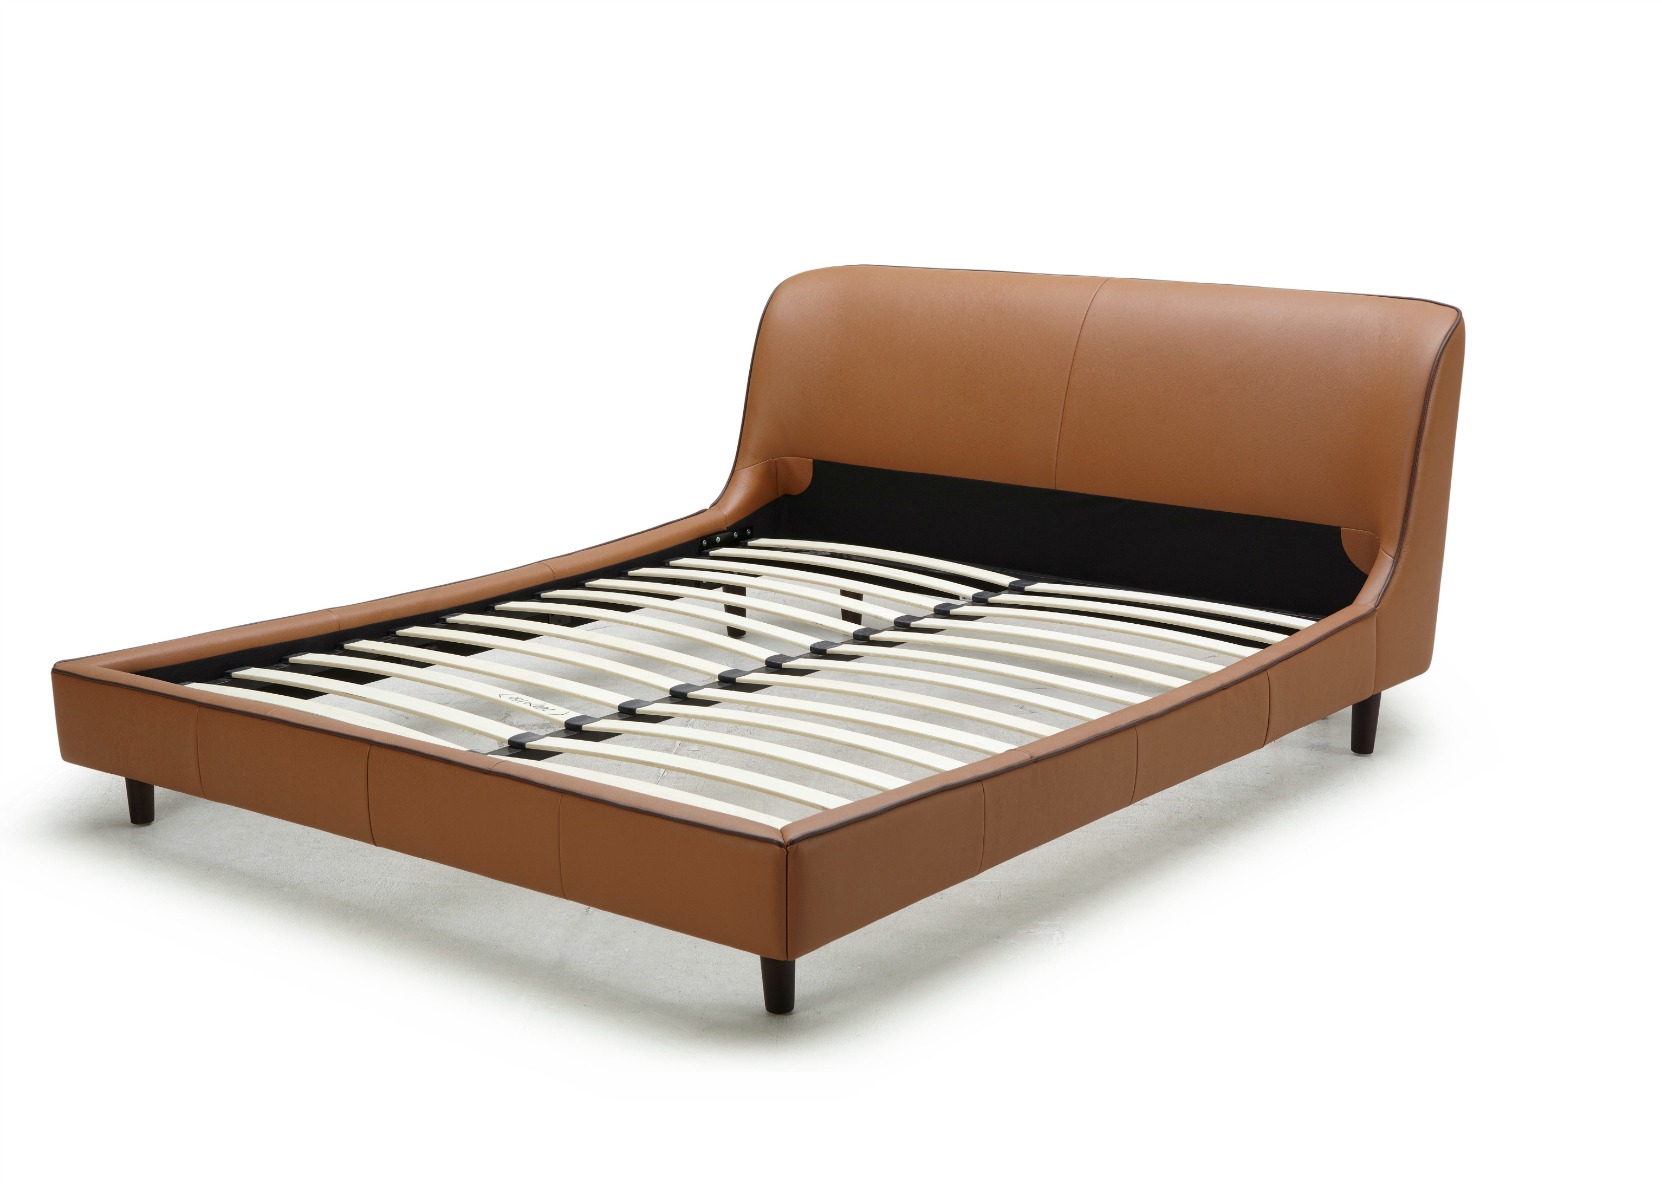 King Size Bed In Tan Leather Upholstery, Tan Leather Bed Frame